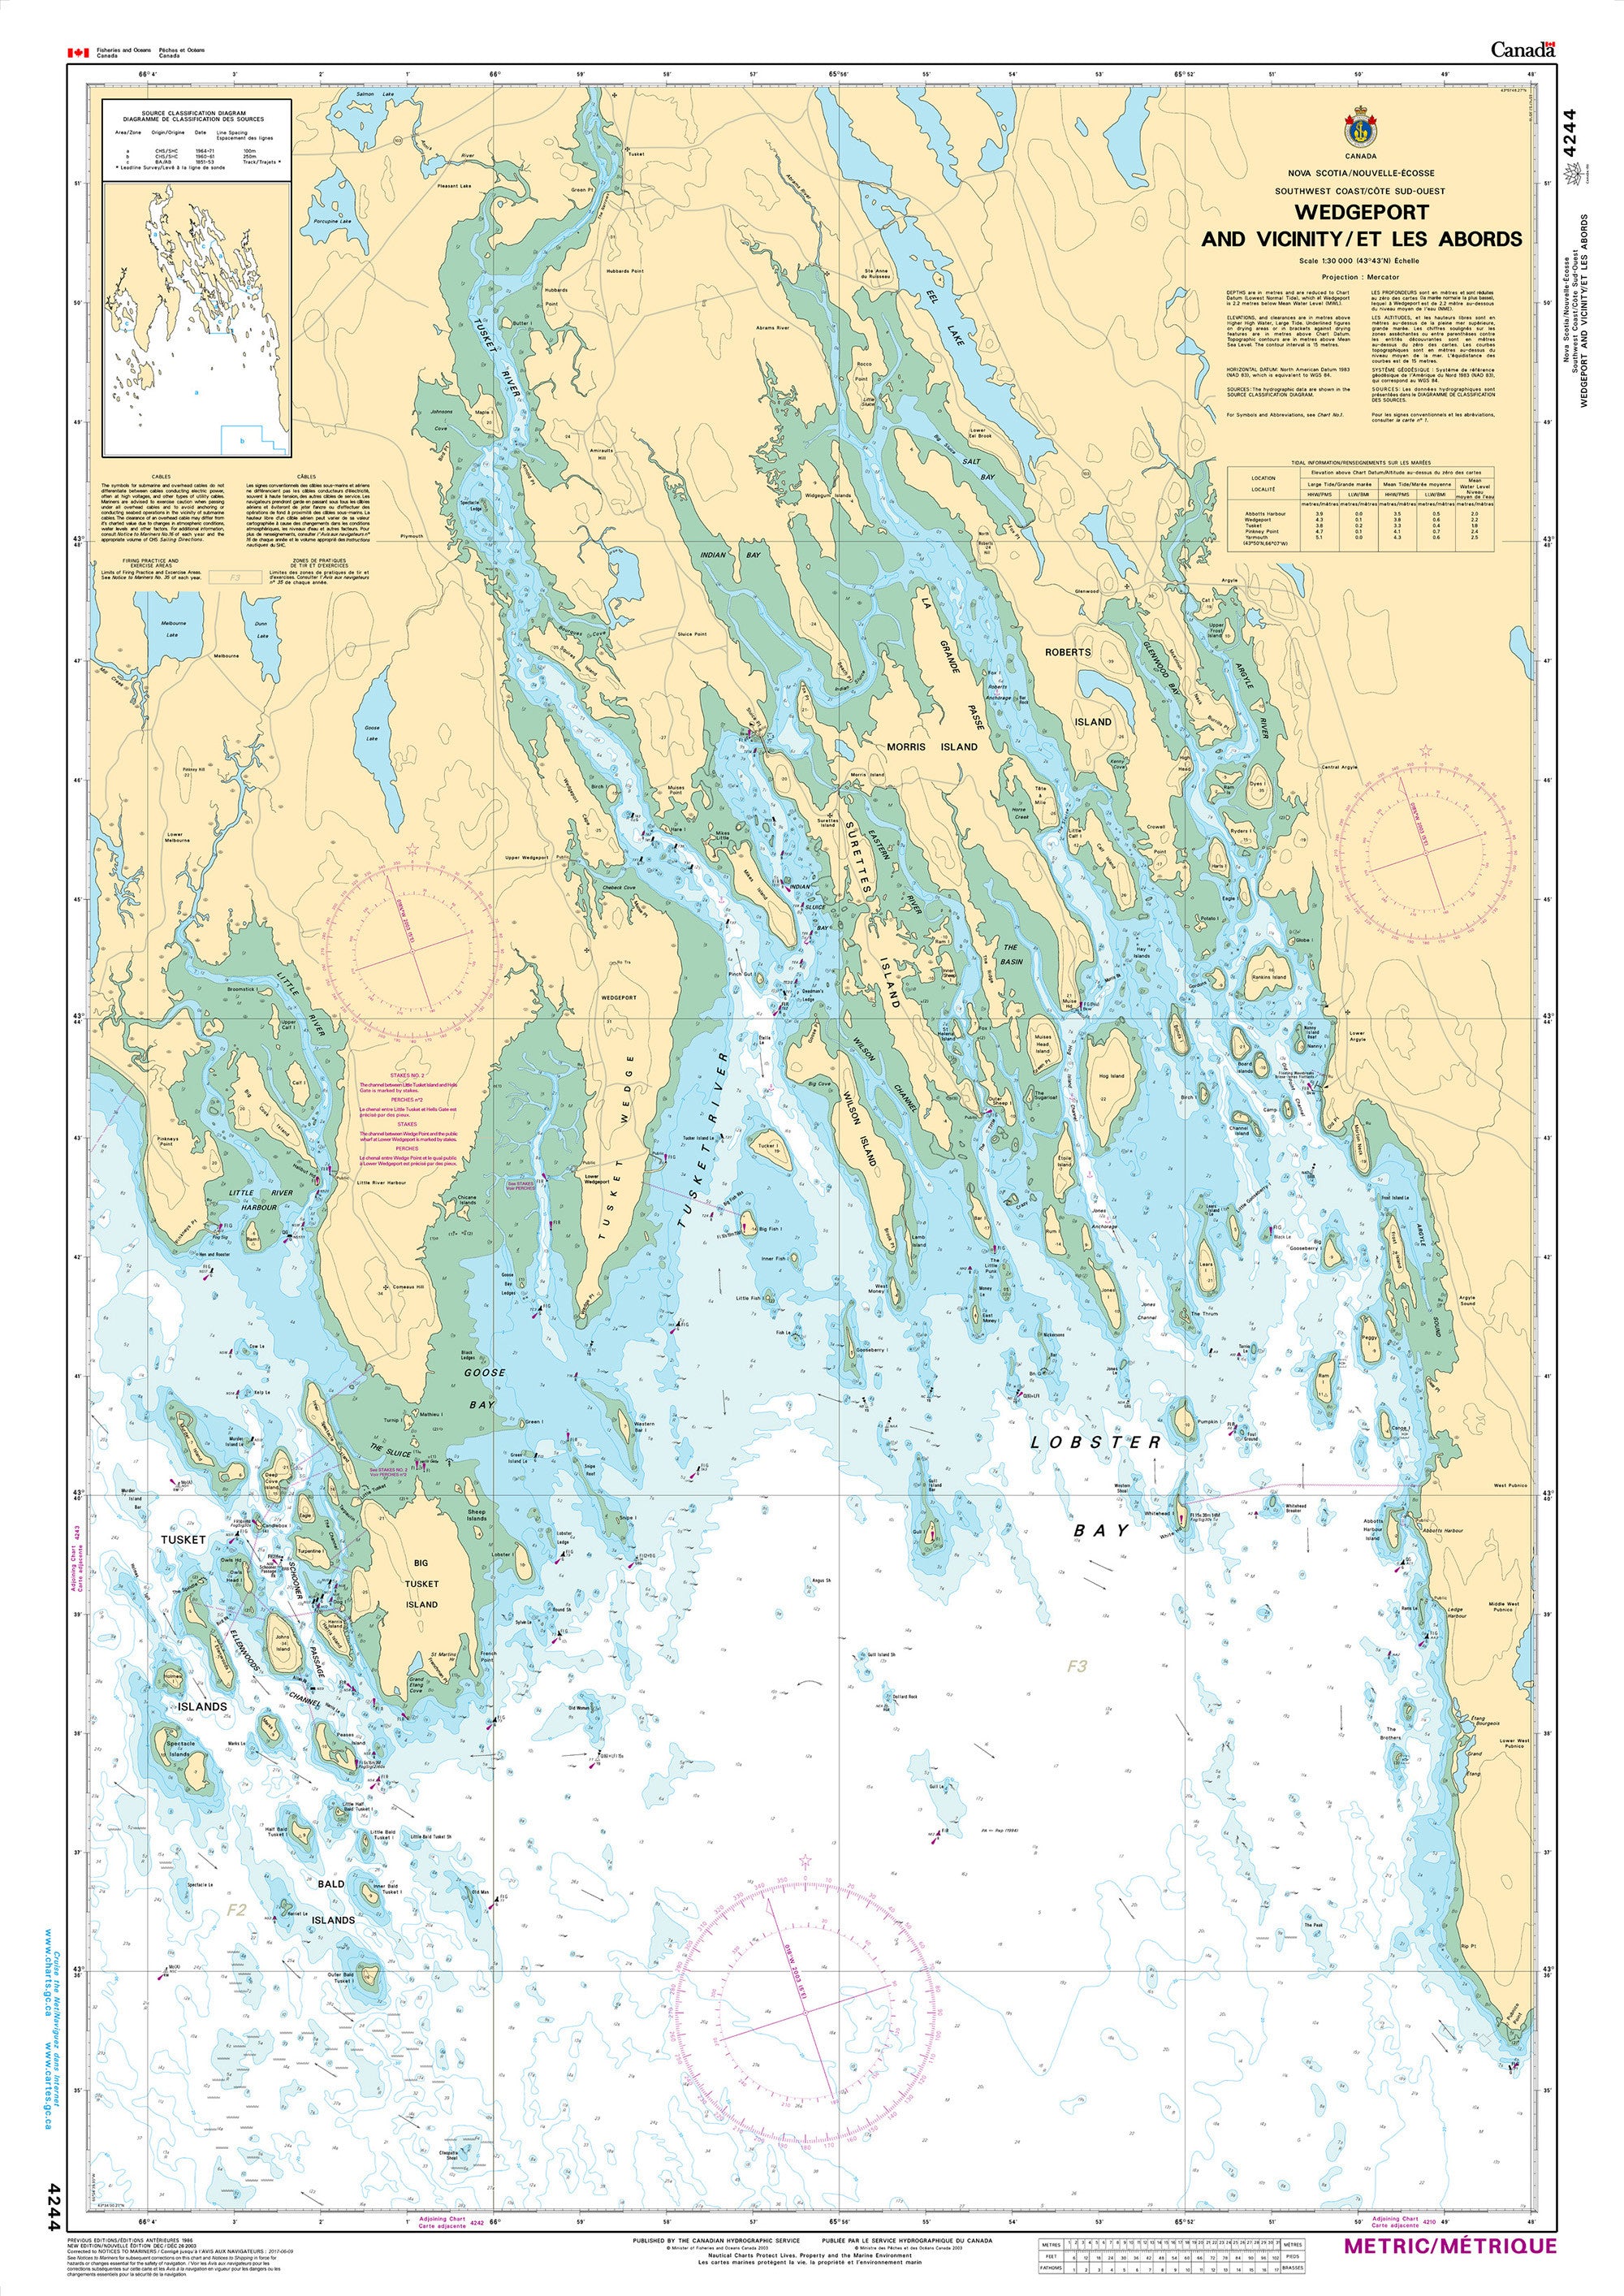 Canadian Hydrographic Service Nautical Chart CHS4244: Wedgeport and Vicinity/et les abords